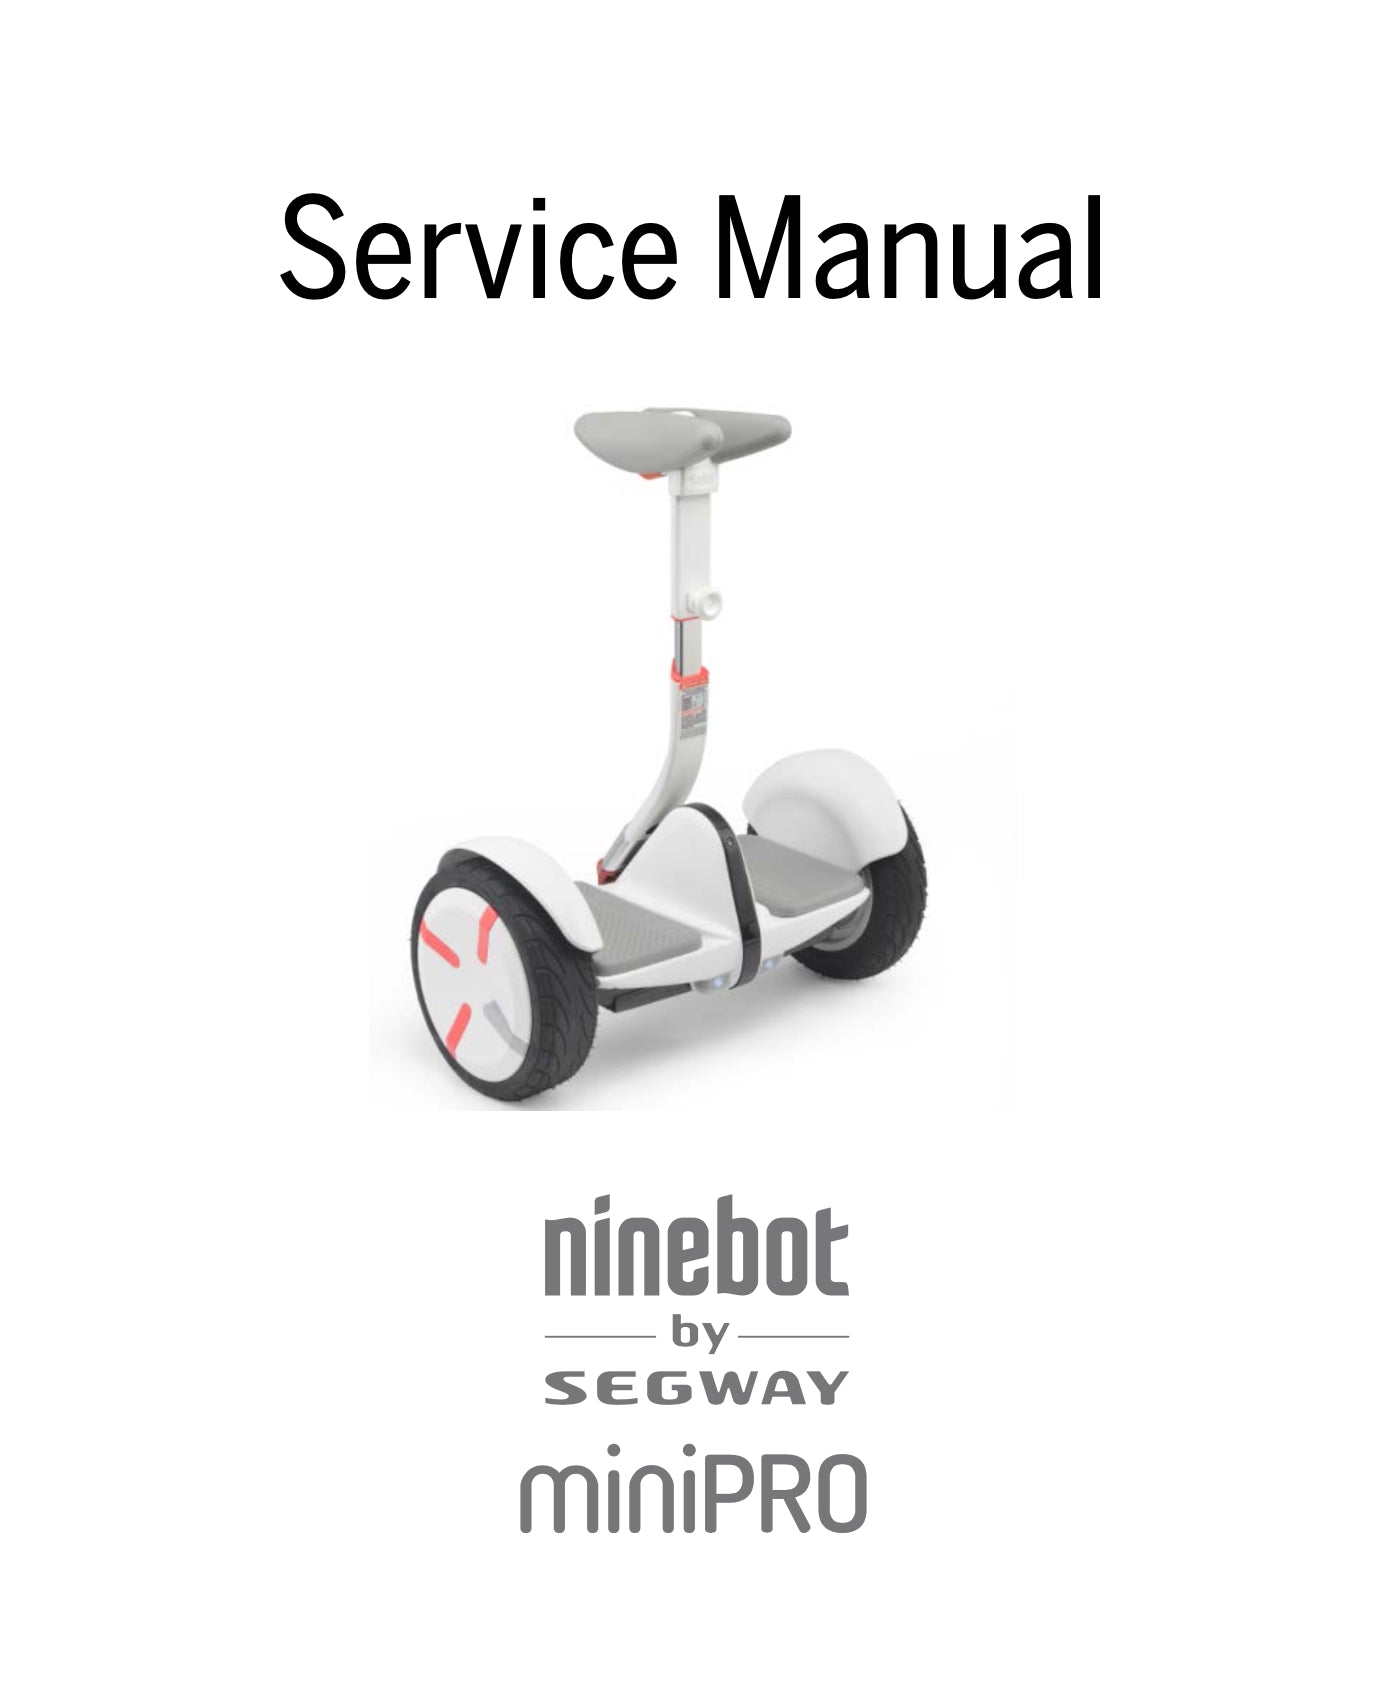 Digital Goods & Currency - Complete Repair Guide For Ninebot S And Segway MiniPRO